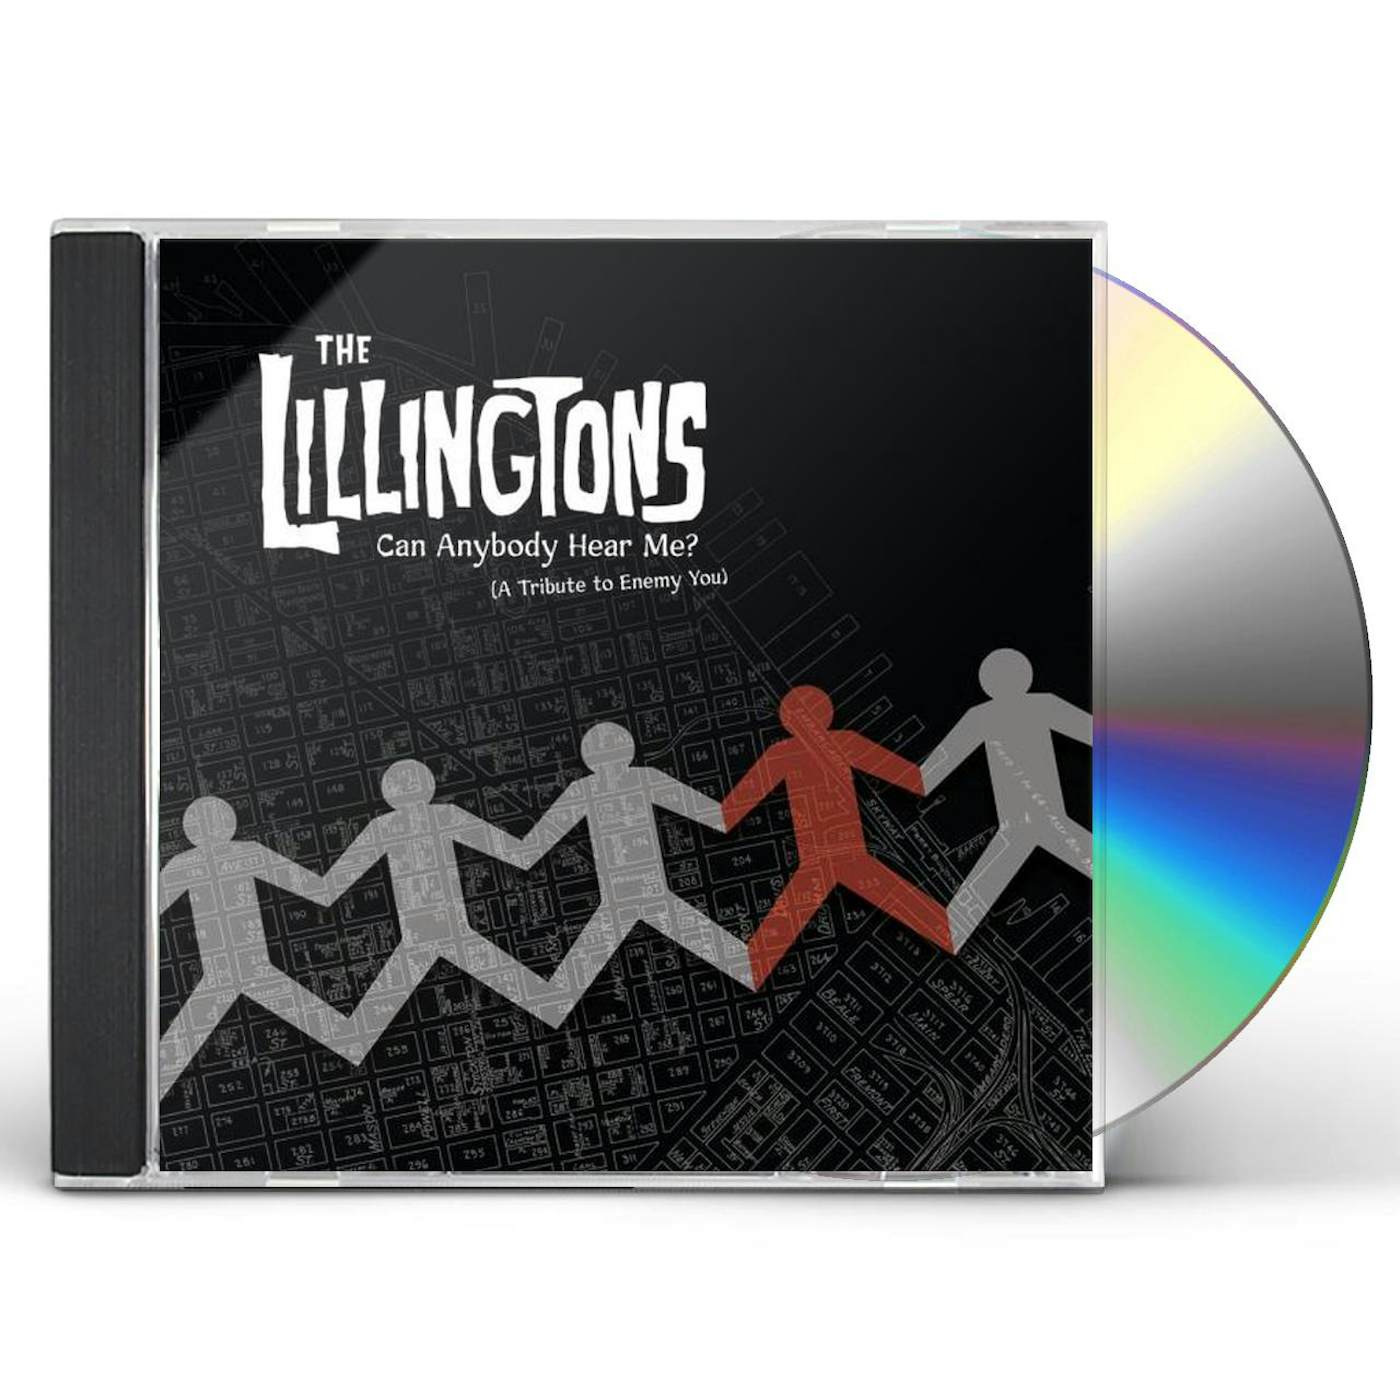 The Lillingtons CAN ANYBODY HEAR ME? (A TRIBUTE TO ENEMY YOU) CD